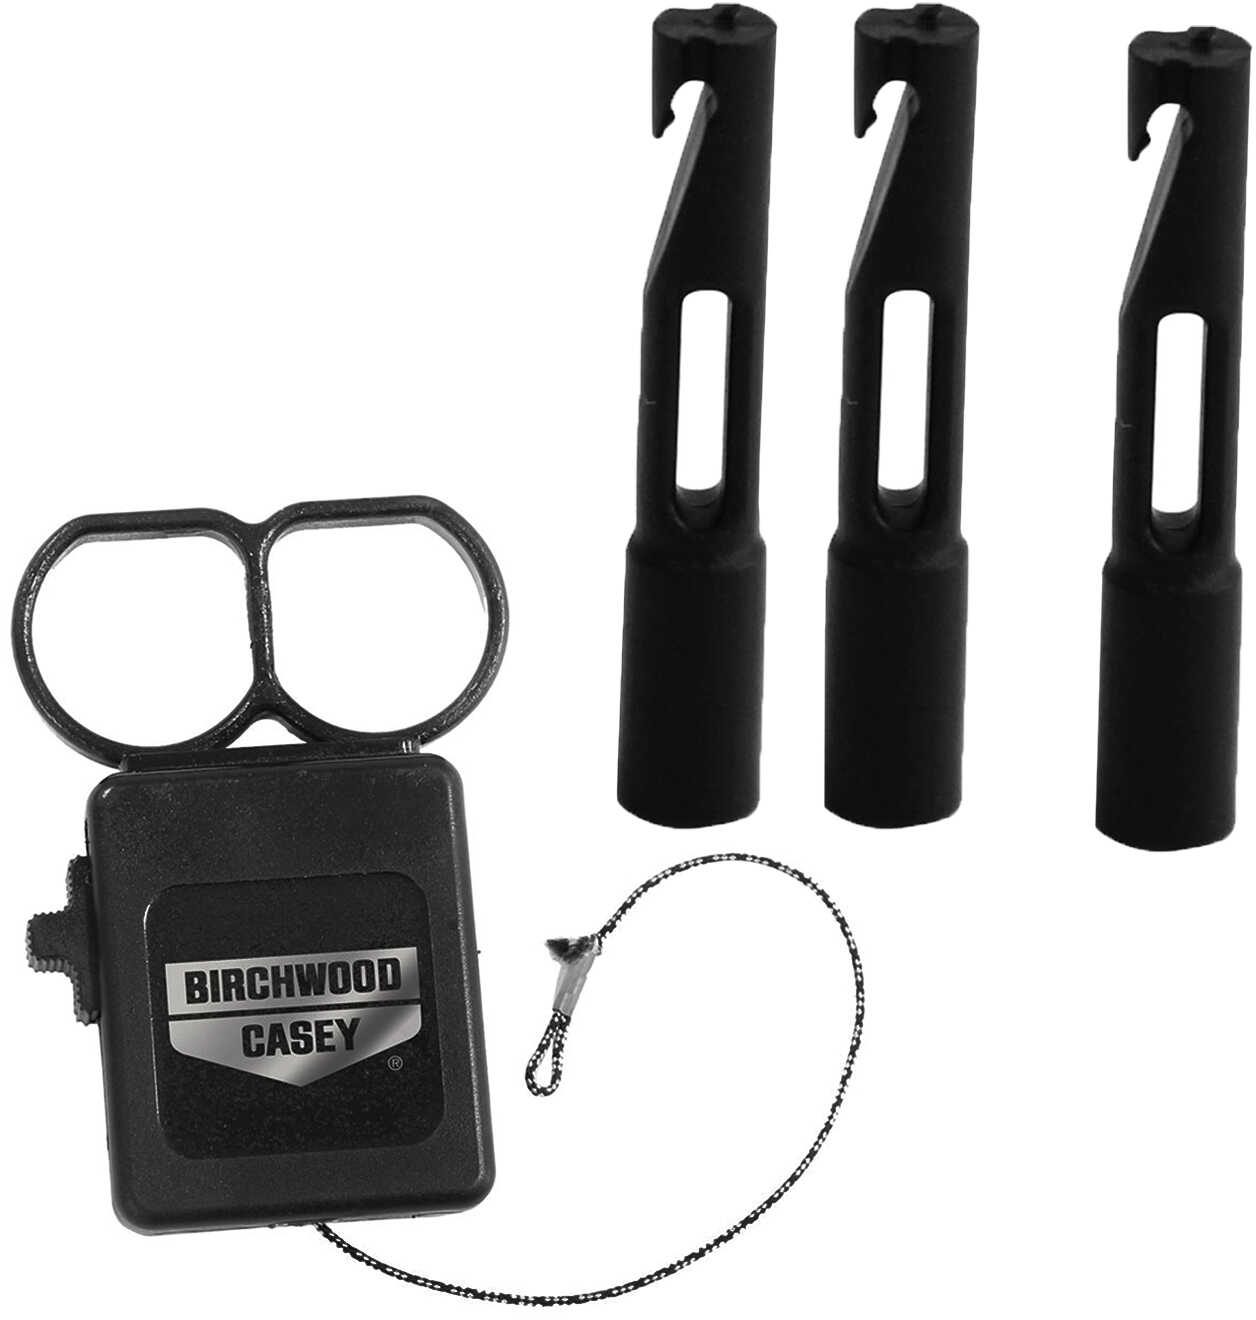 Birchwood Casey Bc-41707 Bore Weevil Retractible Gun Cleaning System Universal Multiple Lengths